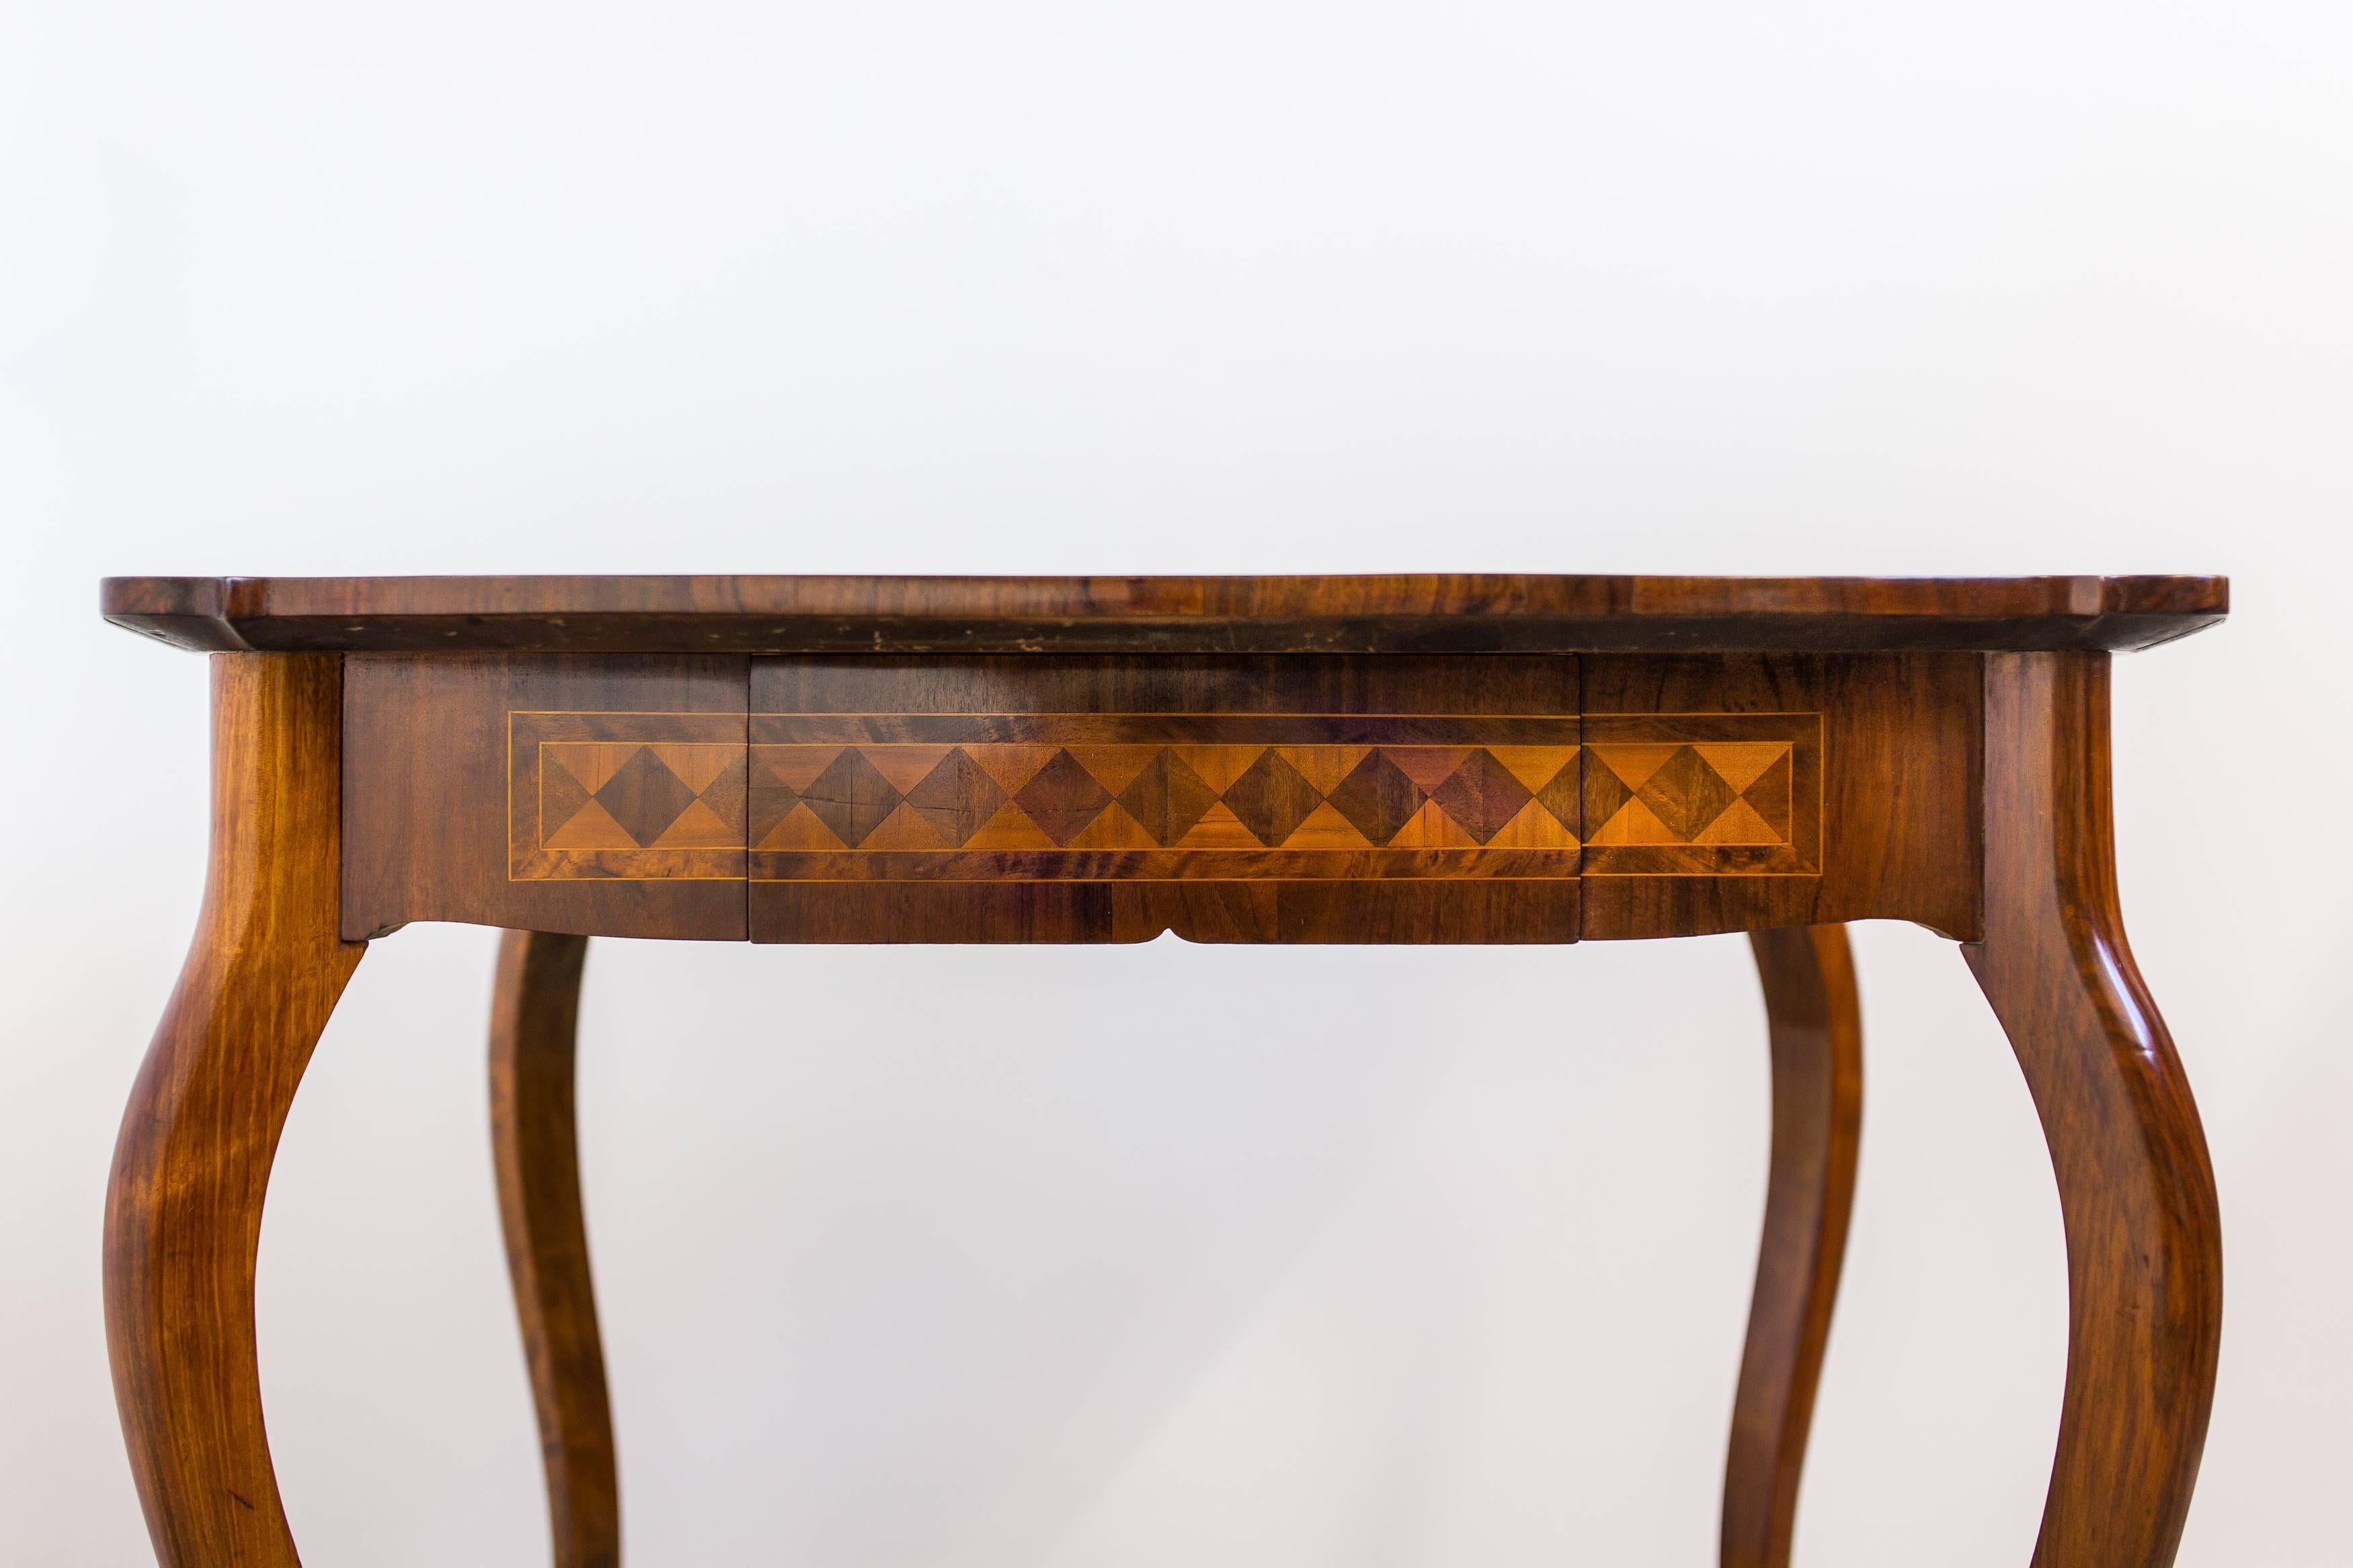 Cherry 19th Century Marquetry Table with Drawer Baroque Revival, Austria, circa 1850 For Sale